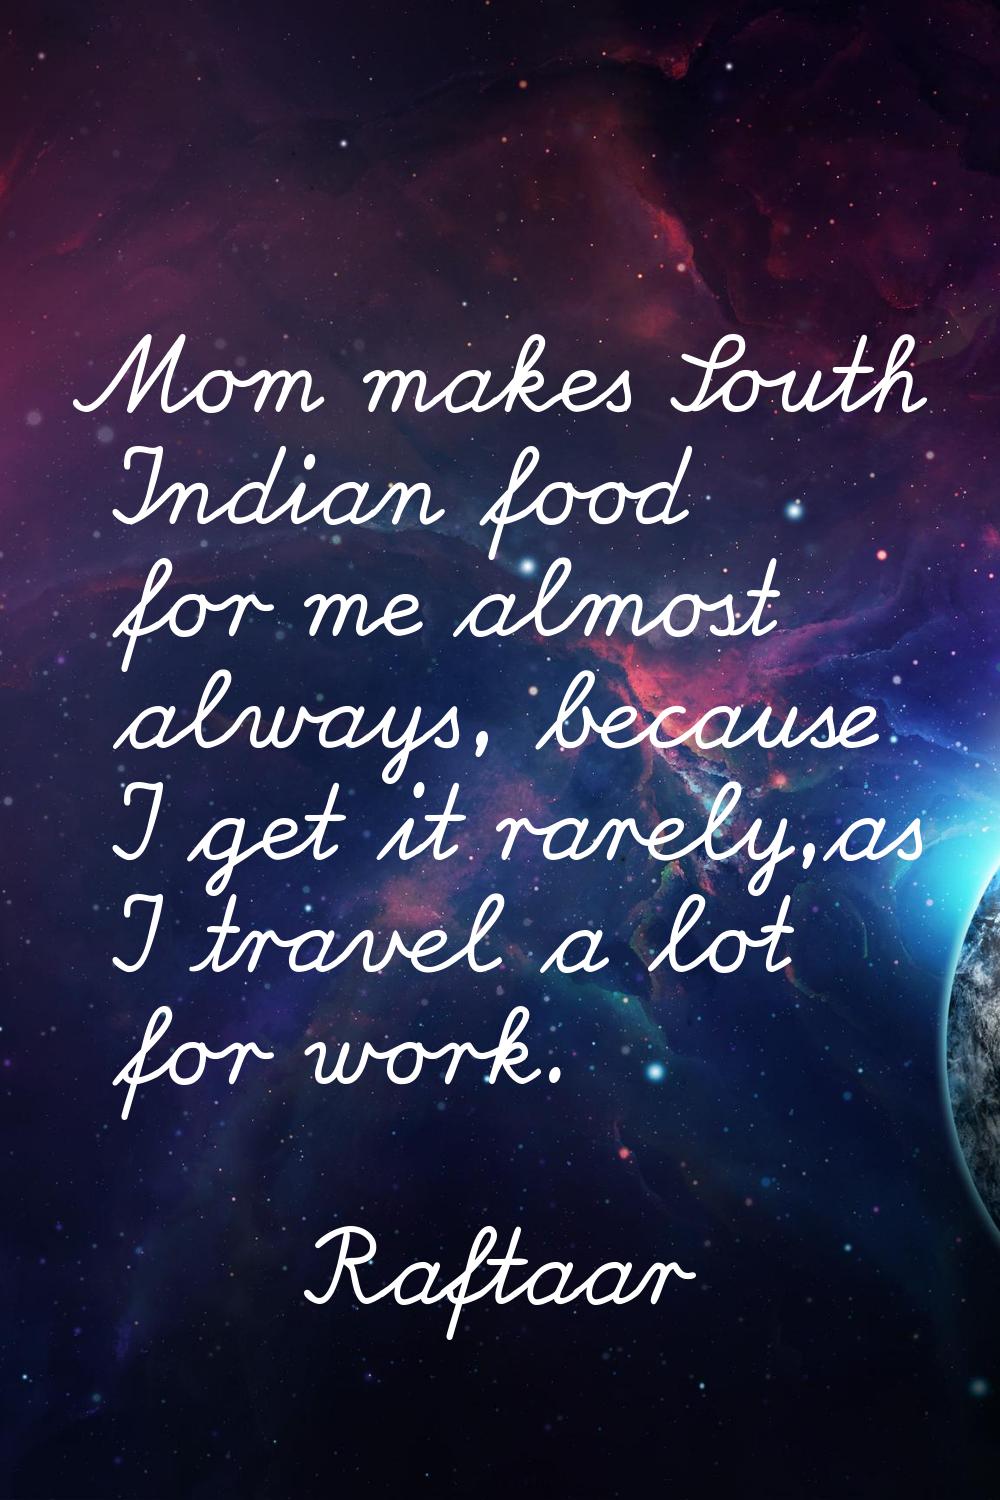 Mom makes South Indian food for me almost always, because I get it rarely,as I travel a lot for wor